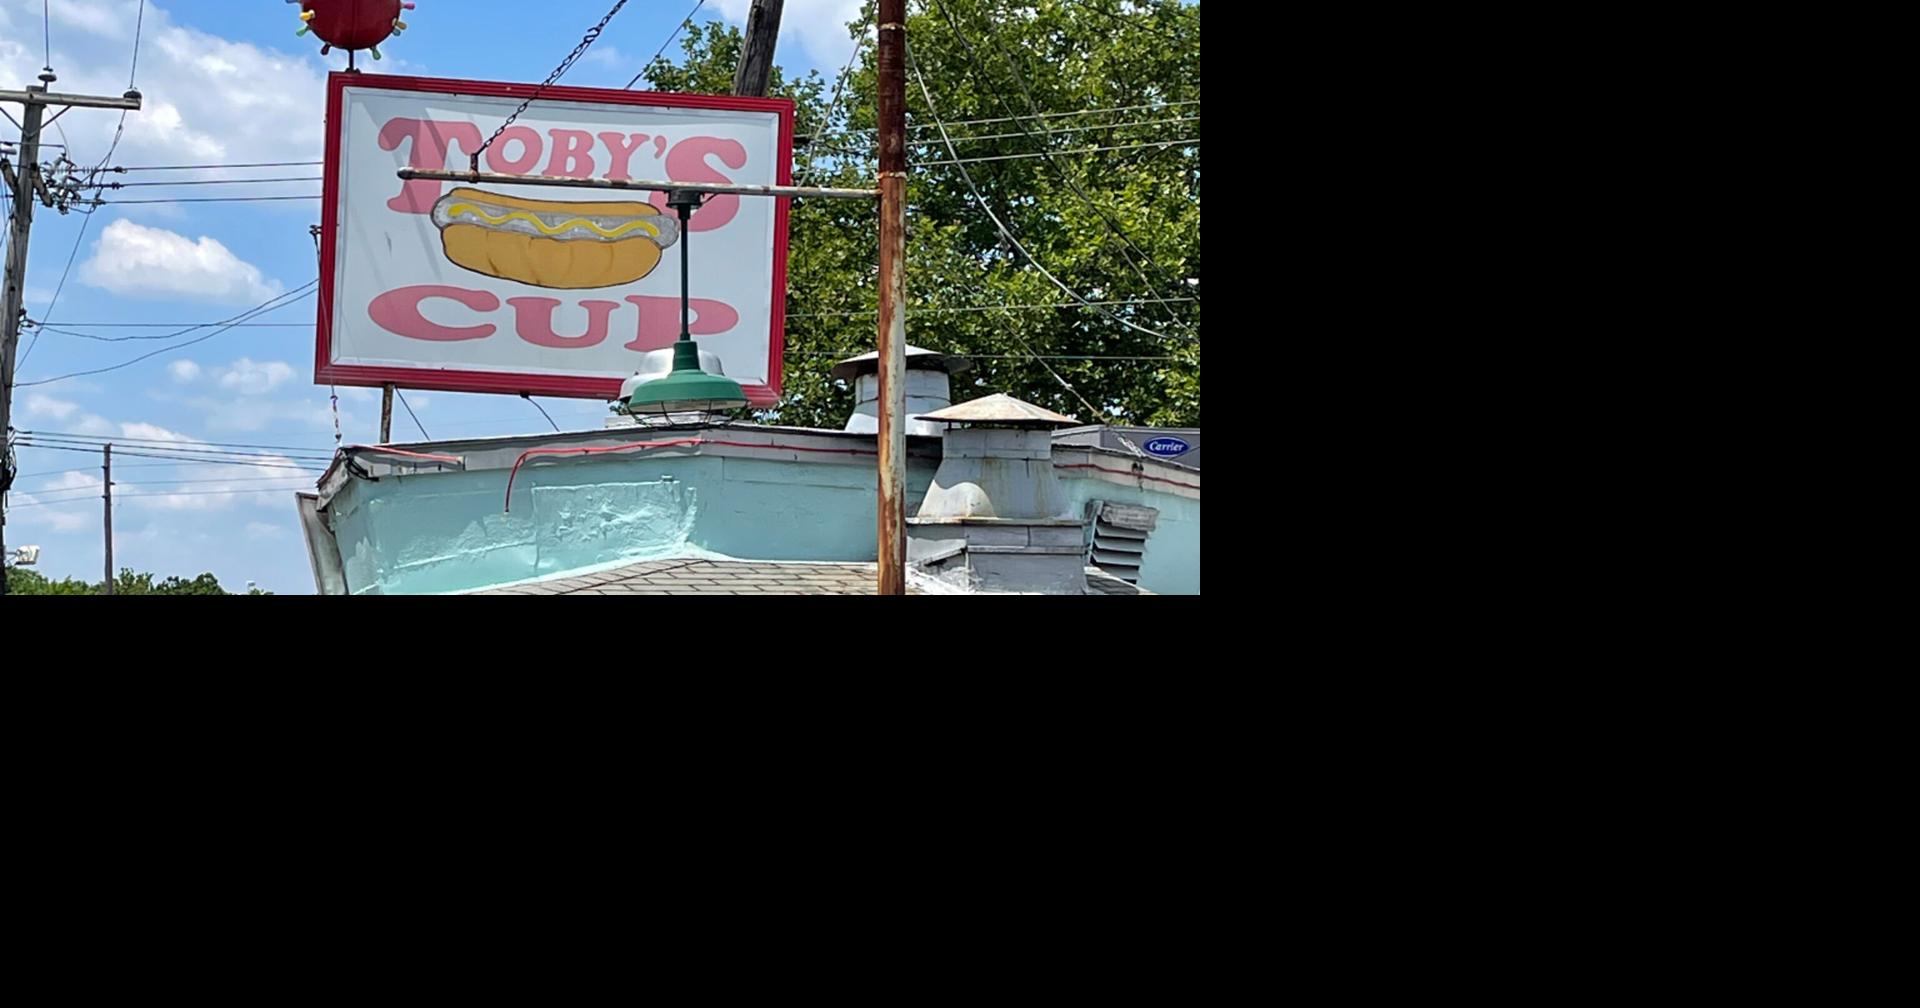 Toby's Cup is back in business. Beloved Route 22 hot dog stand sets  reopening date. (UPDATE) 